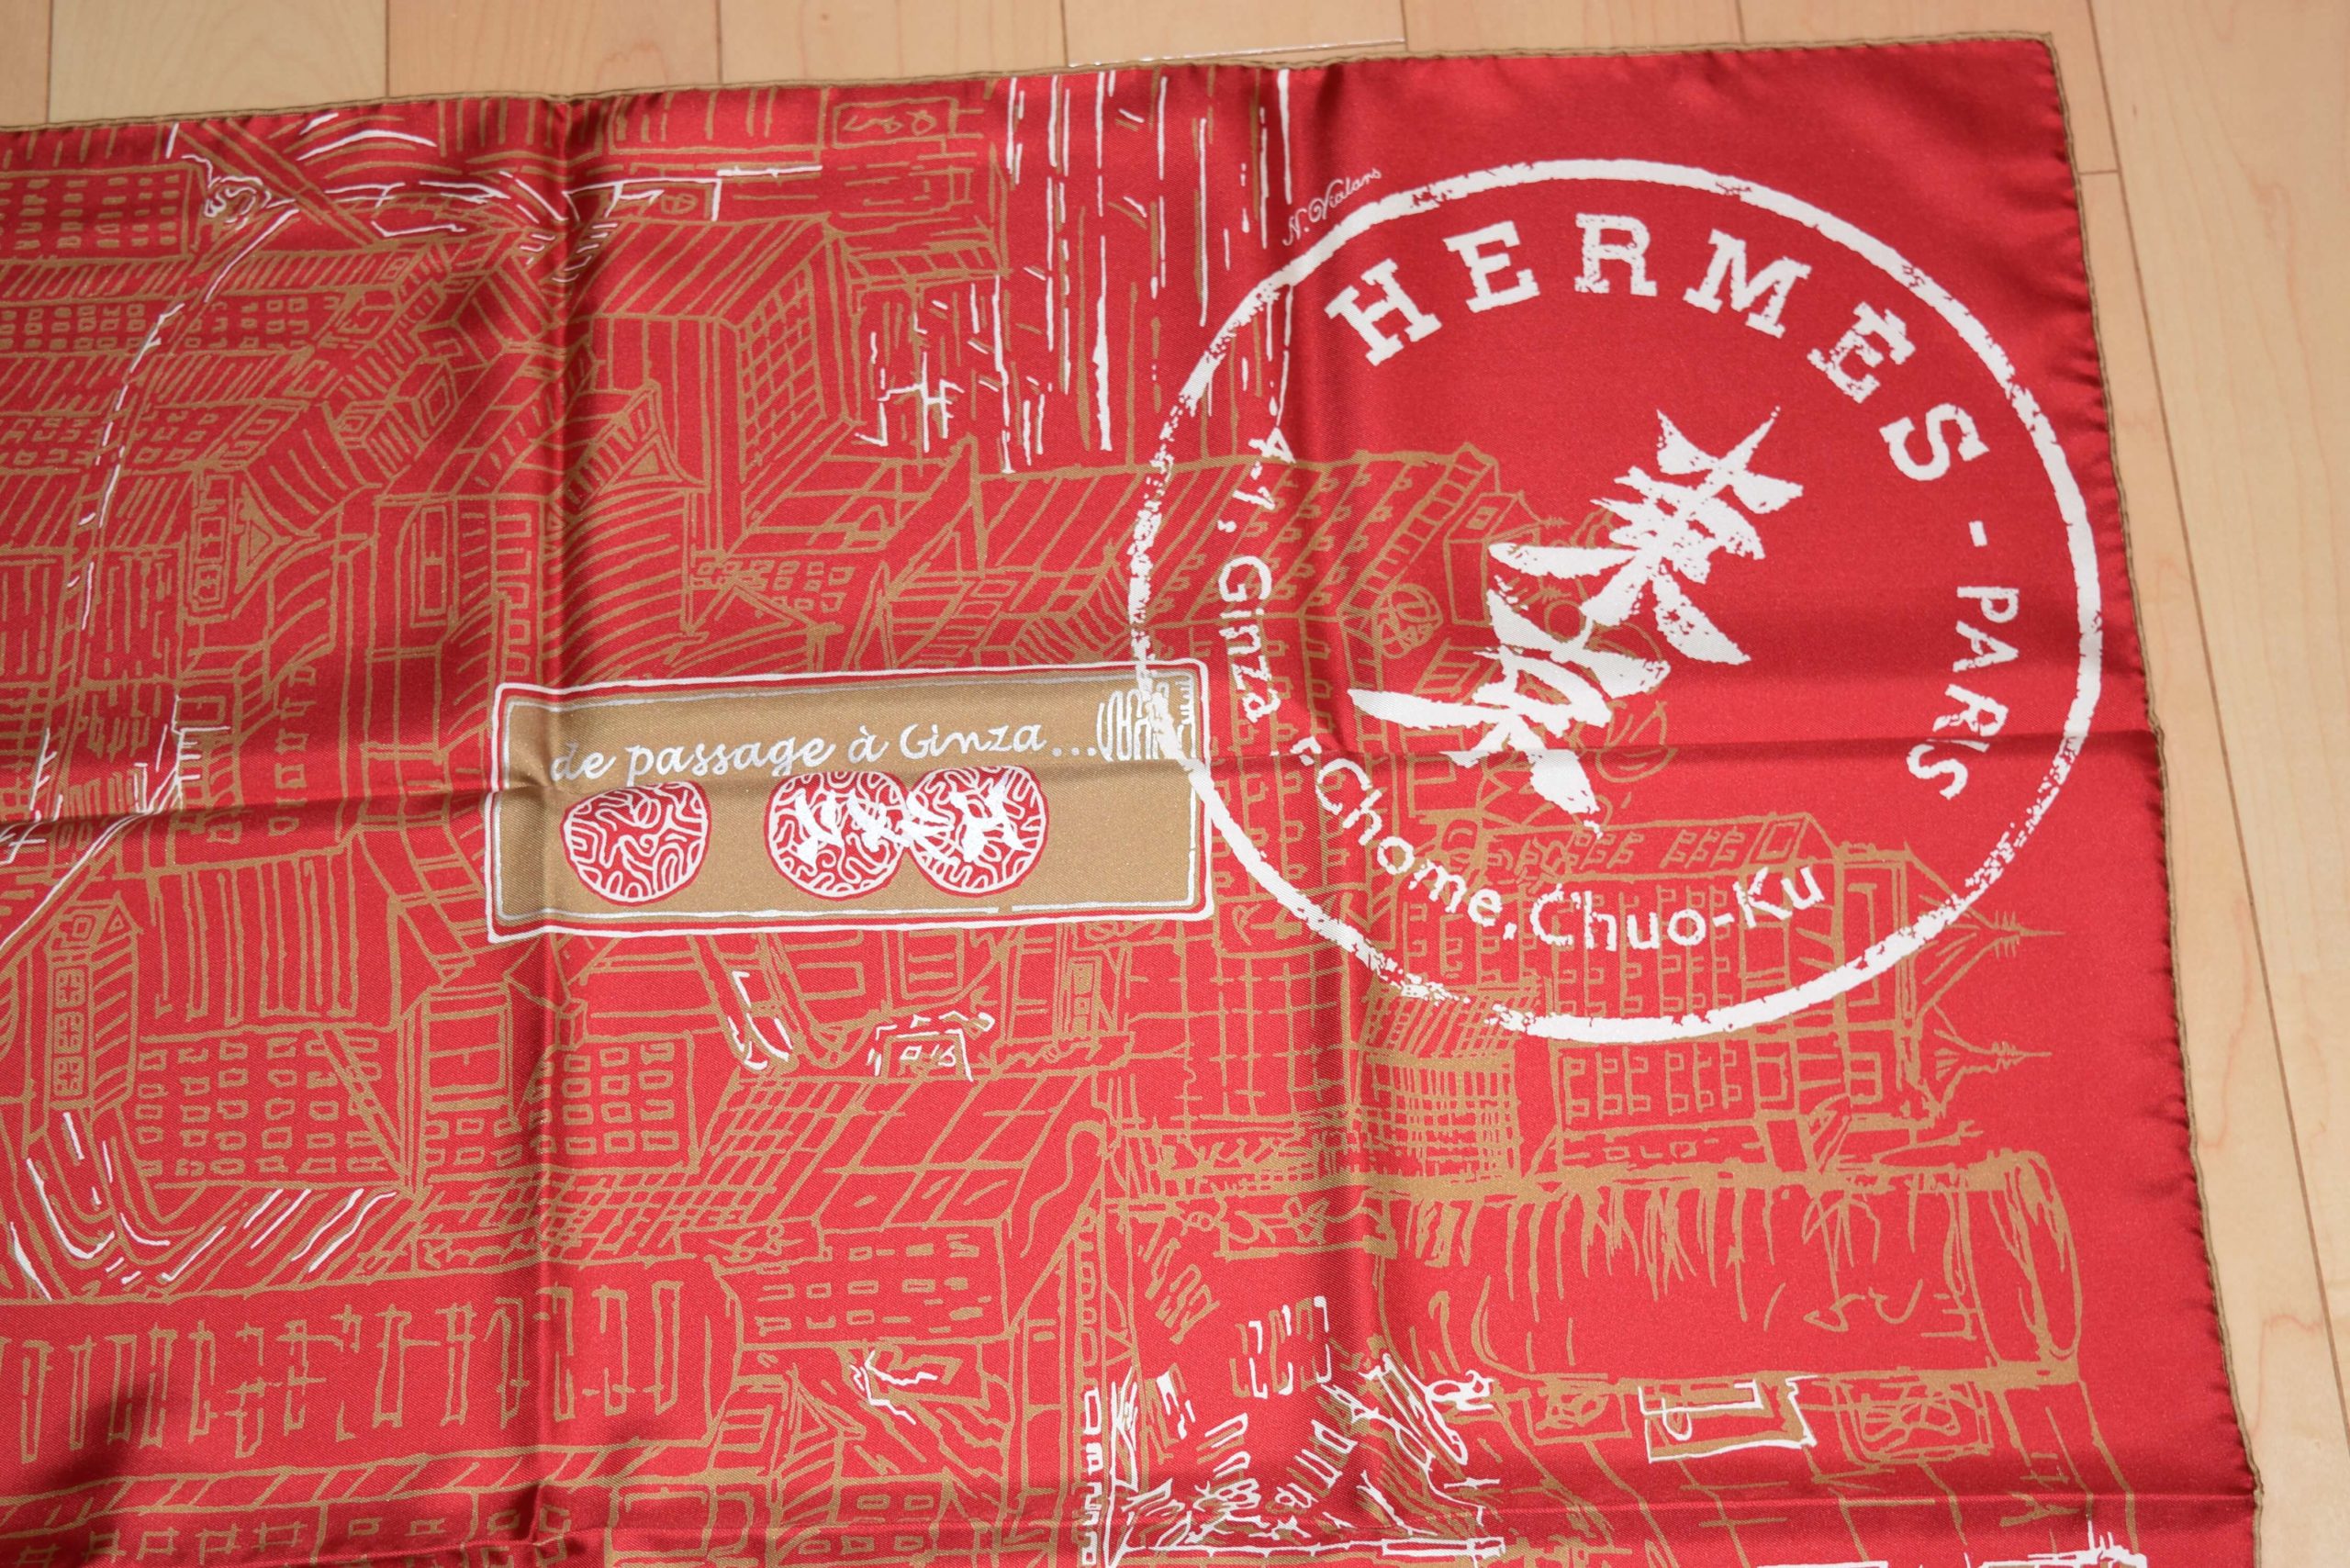 Hermes Scarf De Passage a Ginza Tokyo Silk 90 cm Red Carre 35